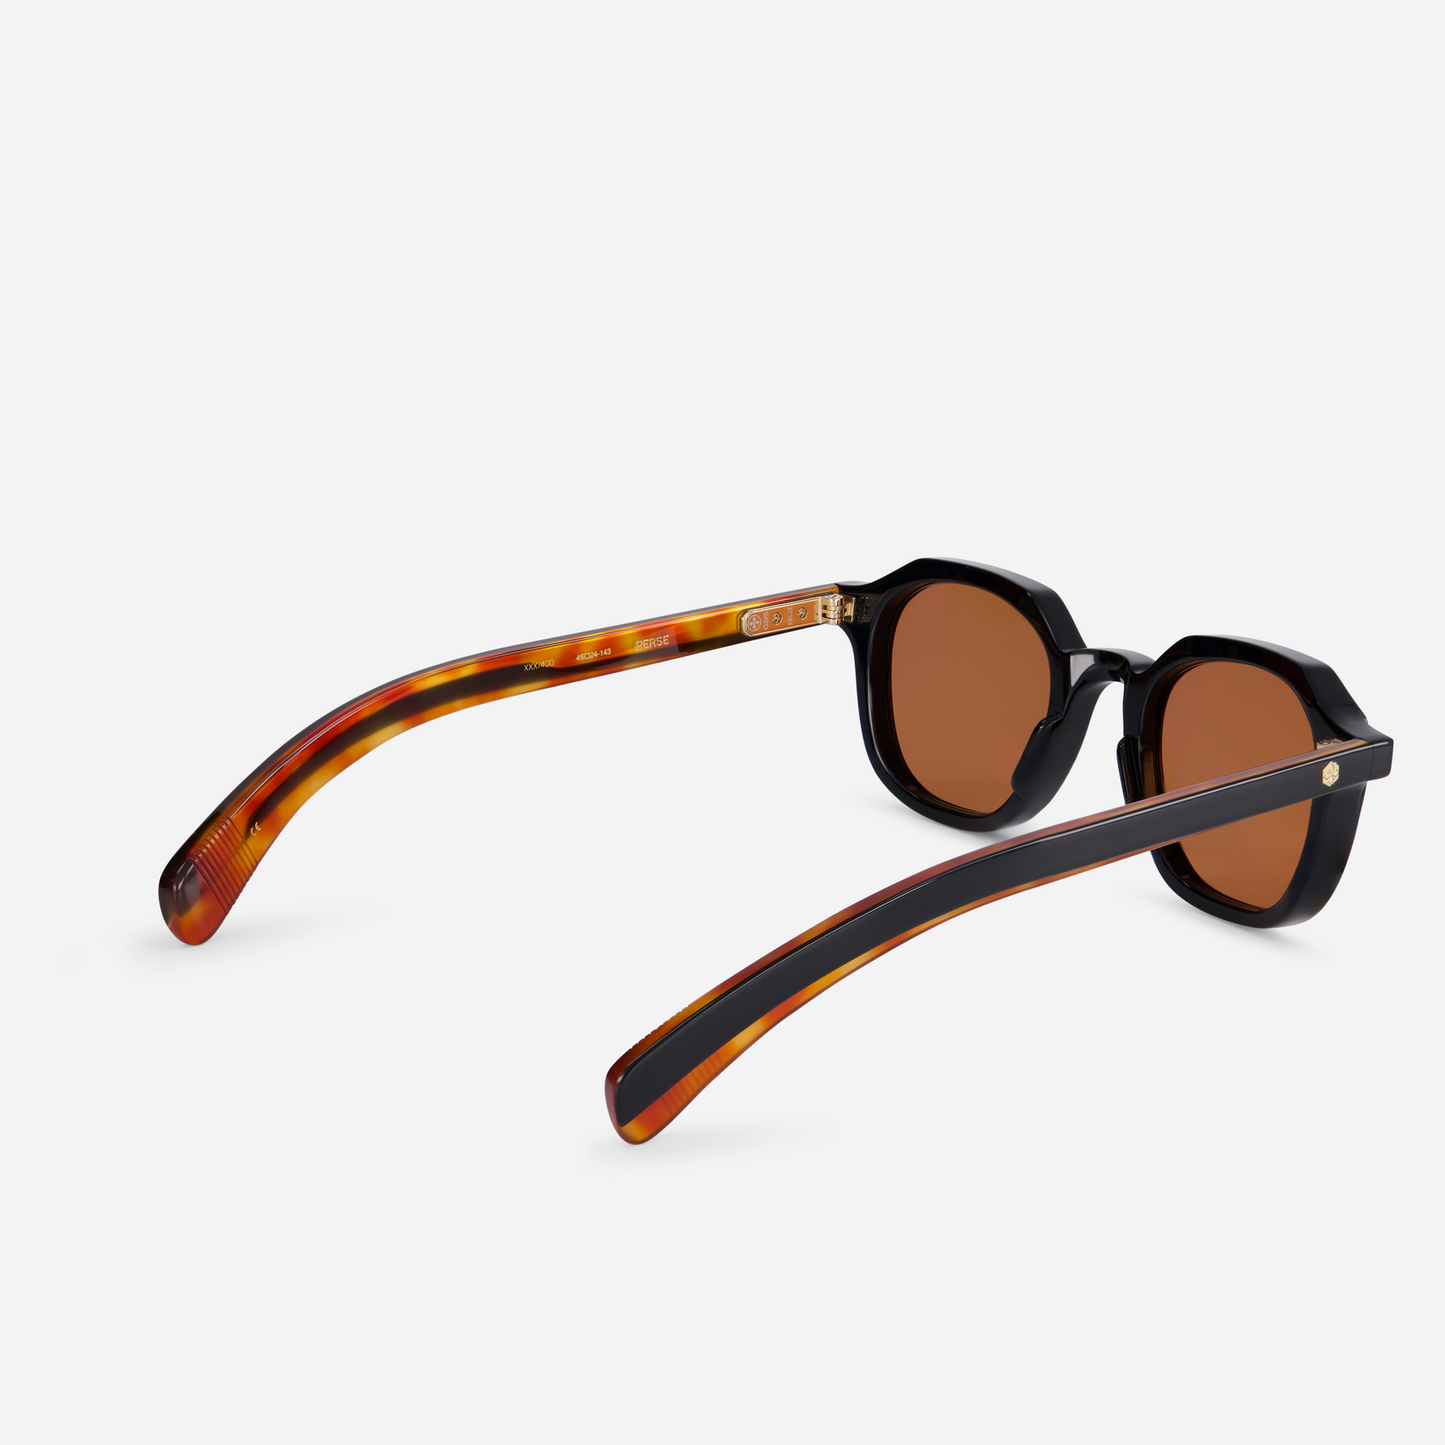 Perse M-1: Elevate your look with the magic of Metropolis color on a Japanese acetate frame, crowned with solid brown lenses. It's time to make a statement.